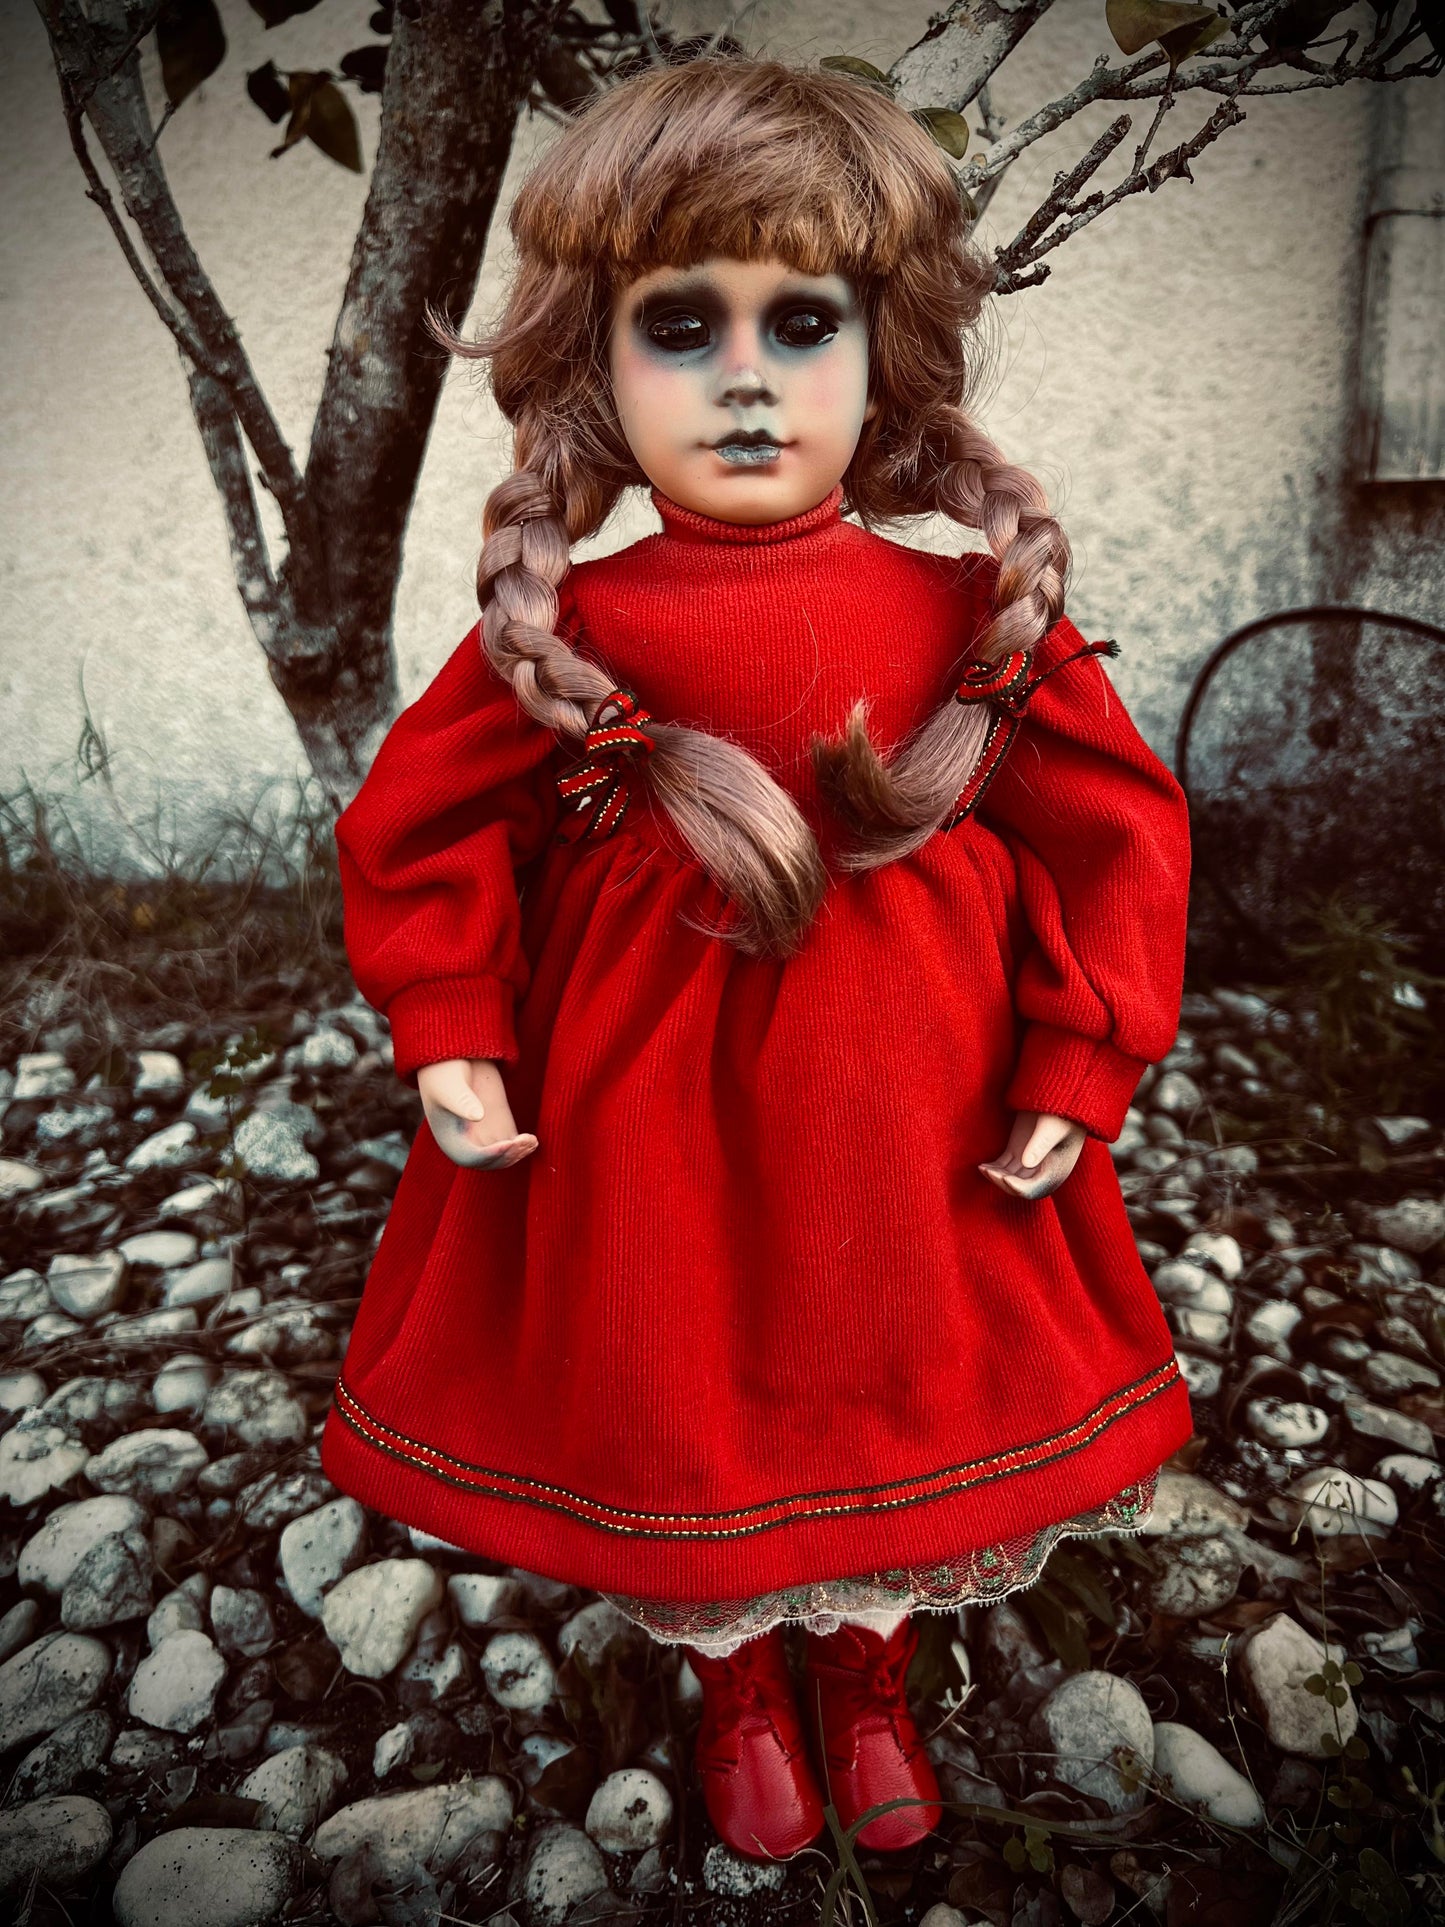 Meet Diane 16" Doll Porcelain Witchy Creepy Haunted Spirit Infected Scary Spooky Zombie Possessed  Positive Energy Occult Gift Idea Vessel